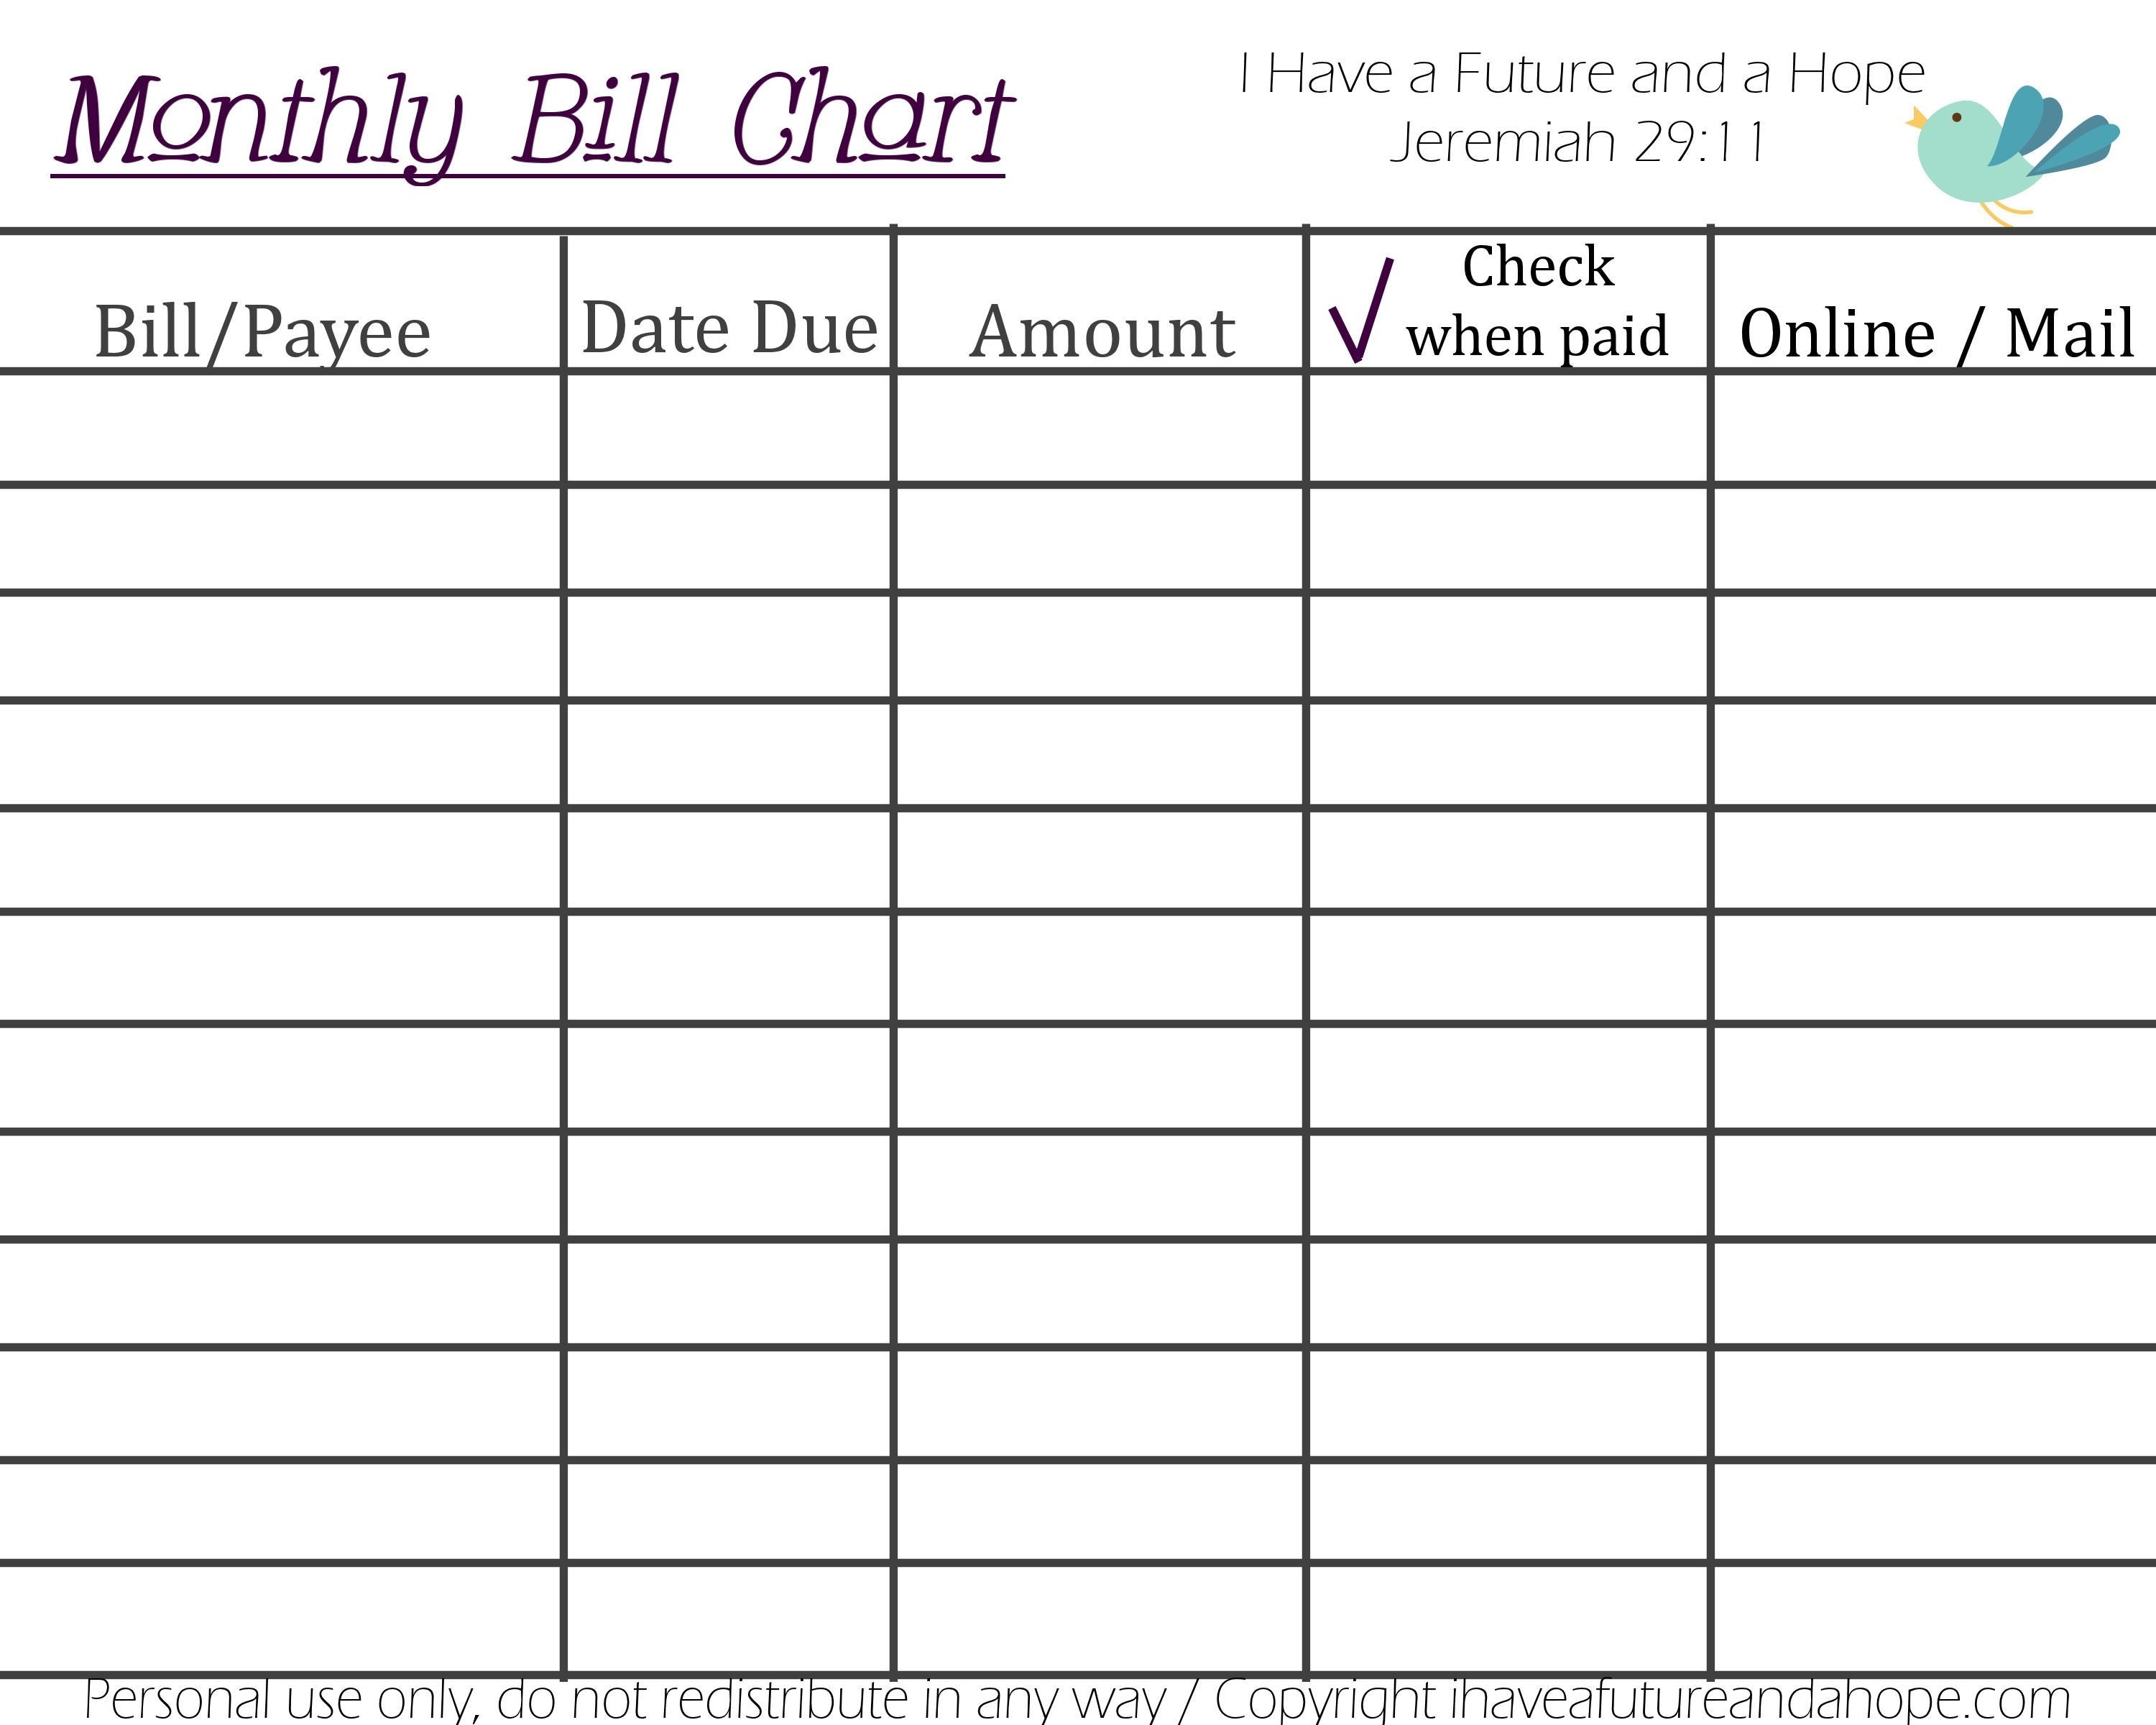 Printable Monthly Bill Chart | Budgeting Ideas | Bill-Downloadable Monthly Bill Chart